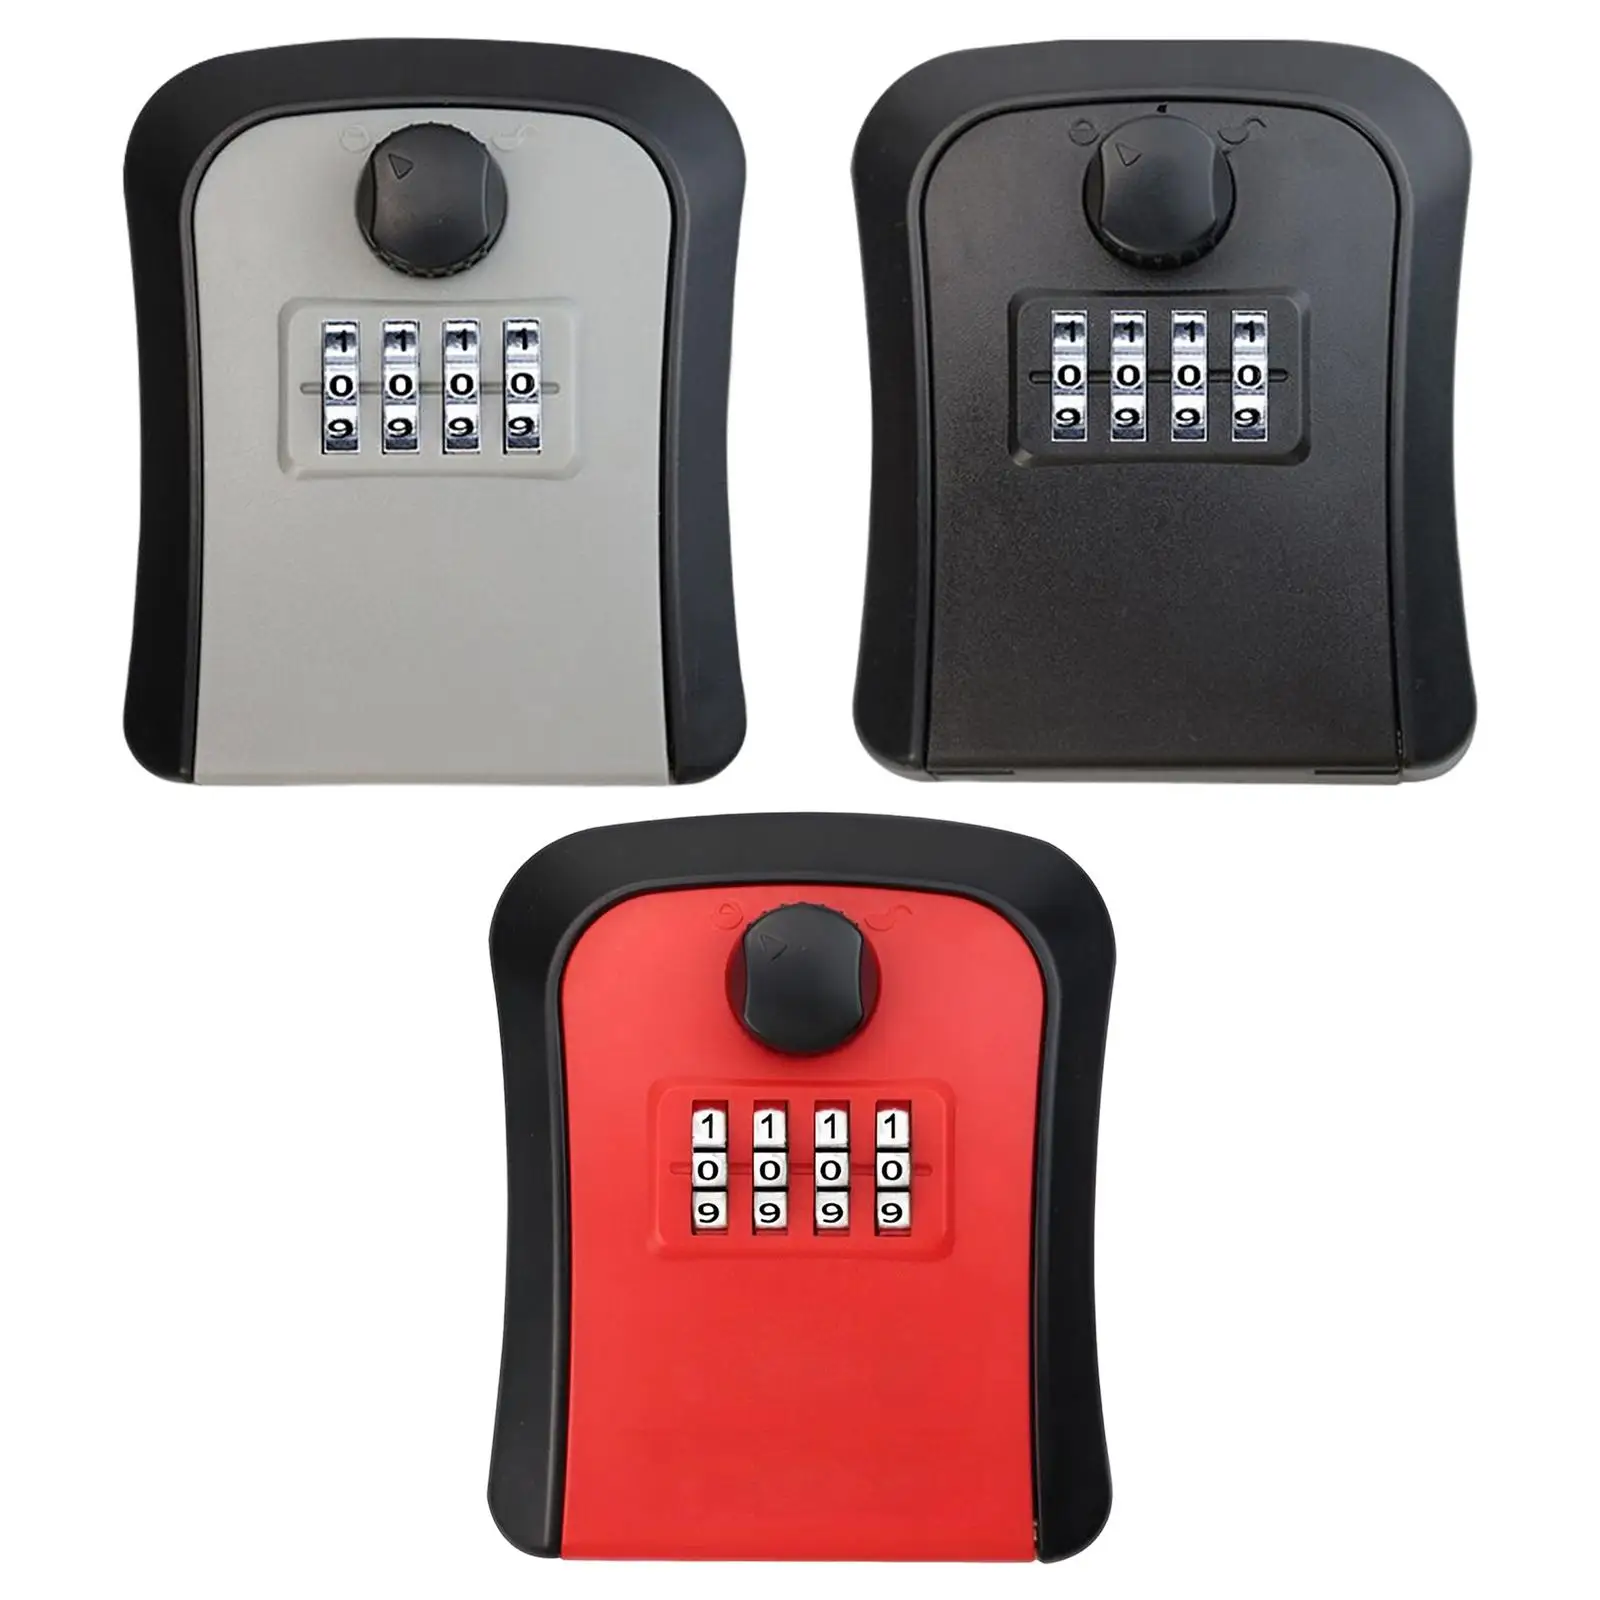 Portable Key Storage Lock Wall Mounted 4 Digit Combination Lock Box for Home Garage Store Indoor Accessories